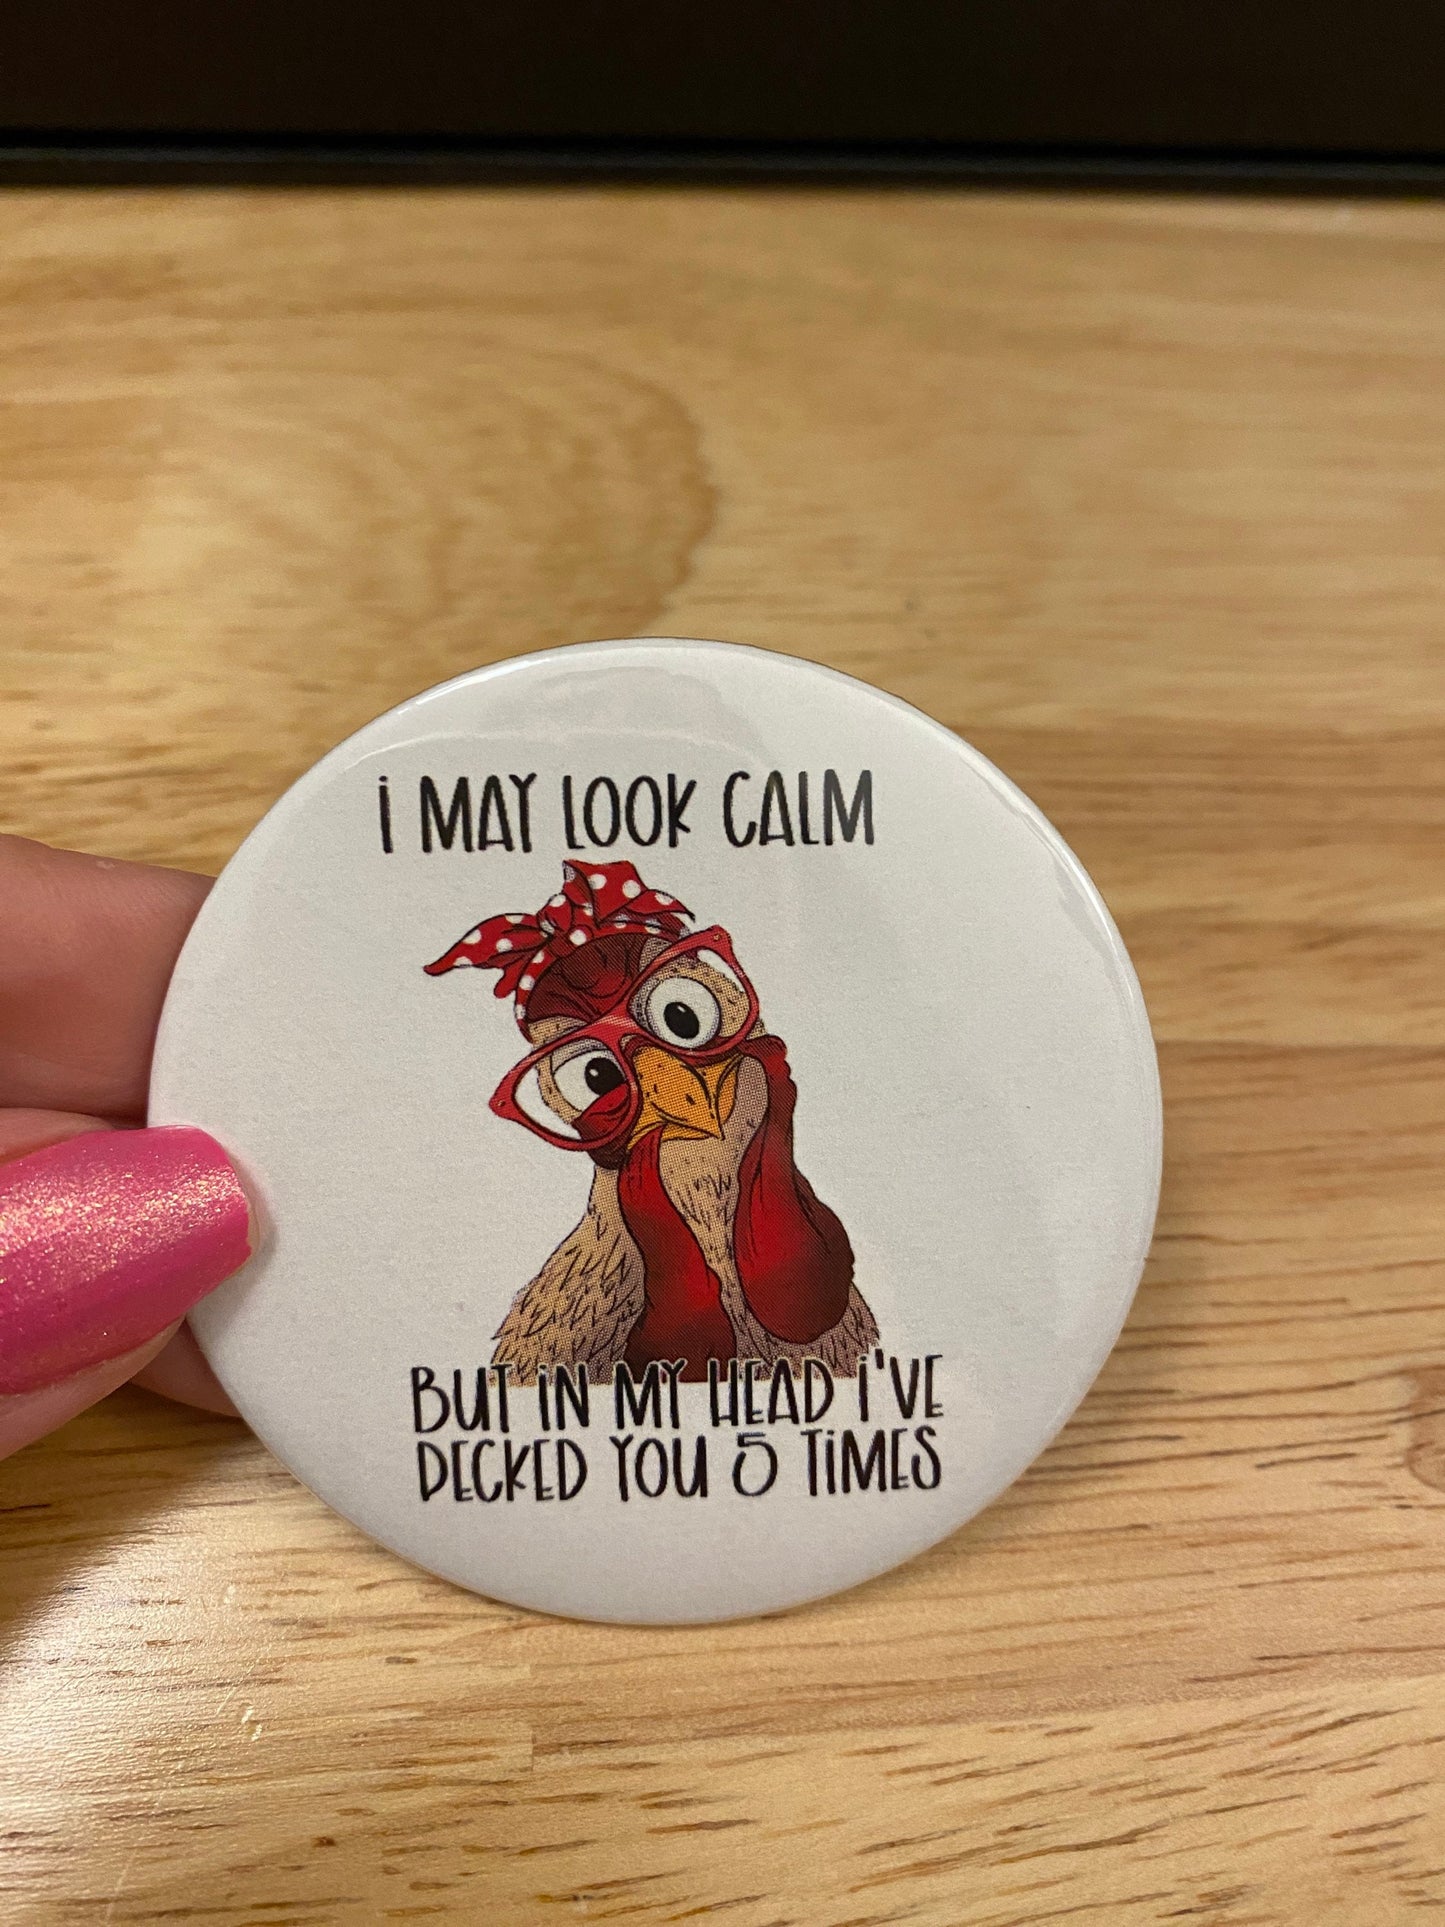 I may look calm but in my mind I've pecked you 10 times Pin Buttons, Chicken Pin Button